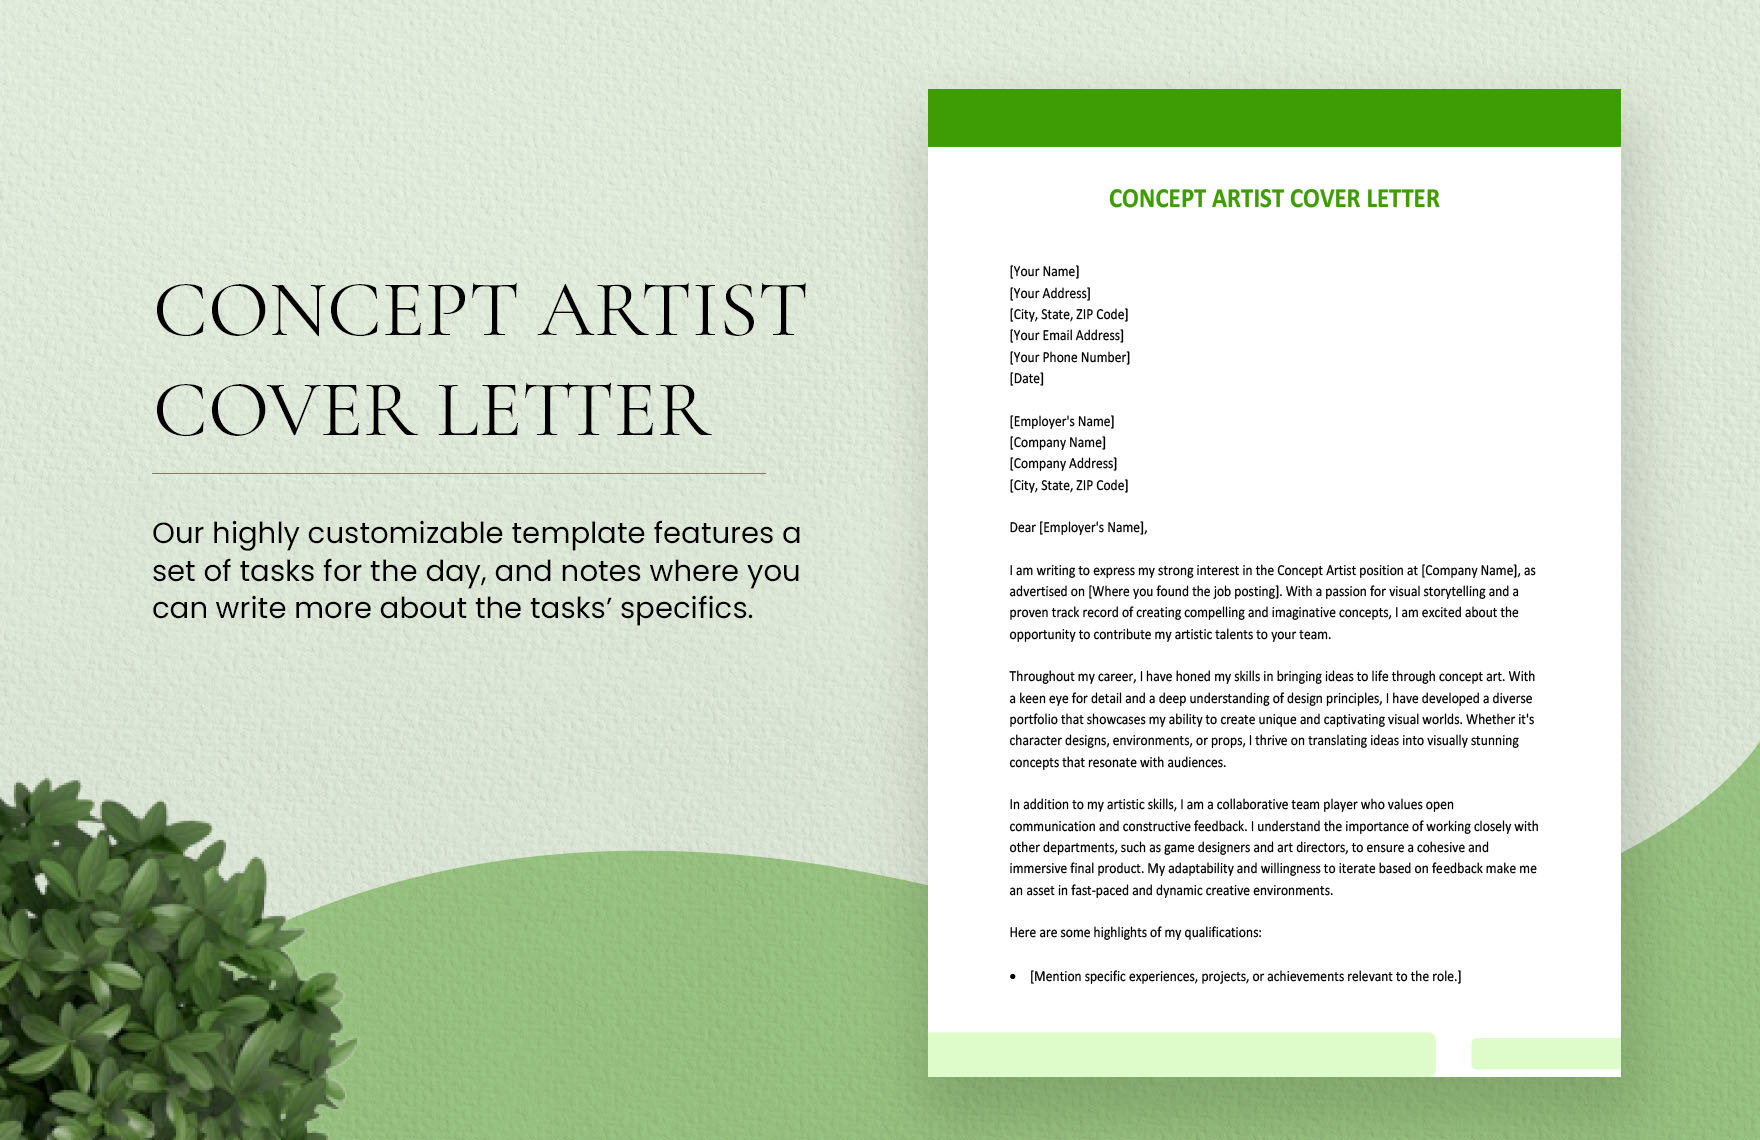 Concept Artist Cover Letter in Word, Google Docs